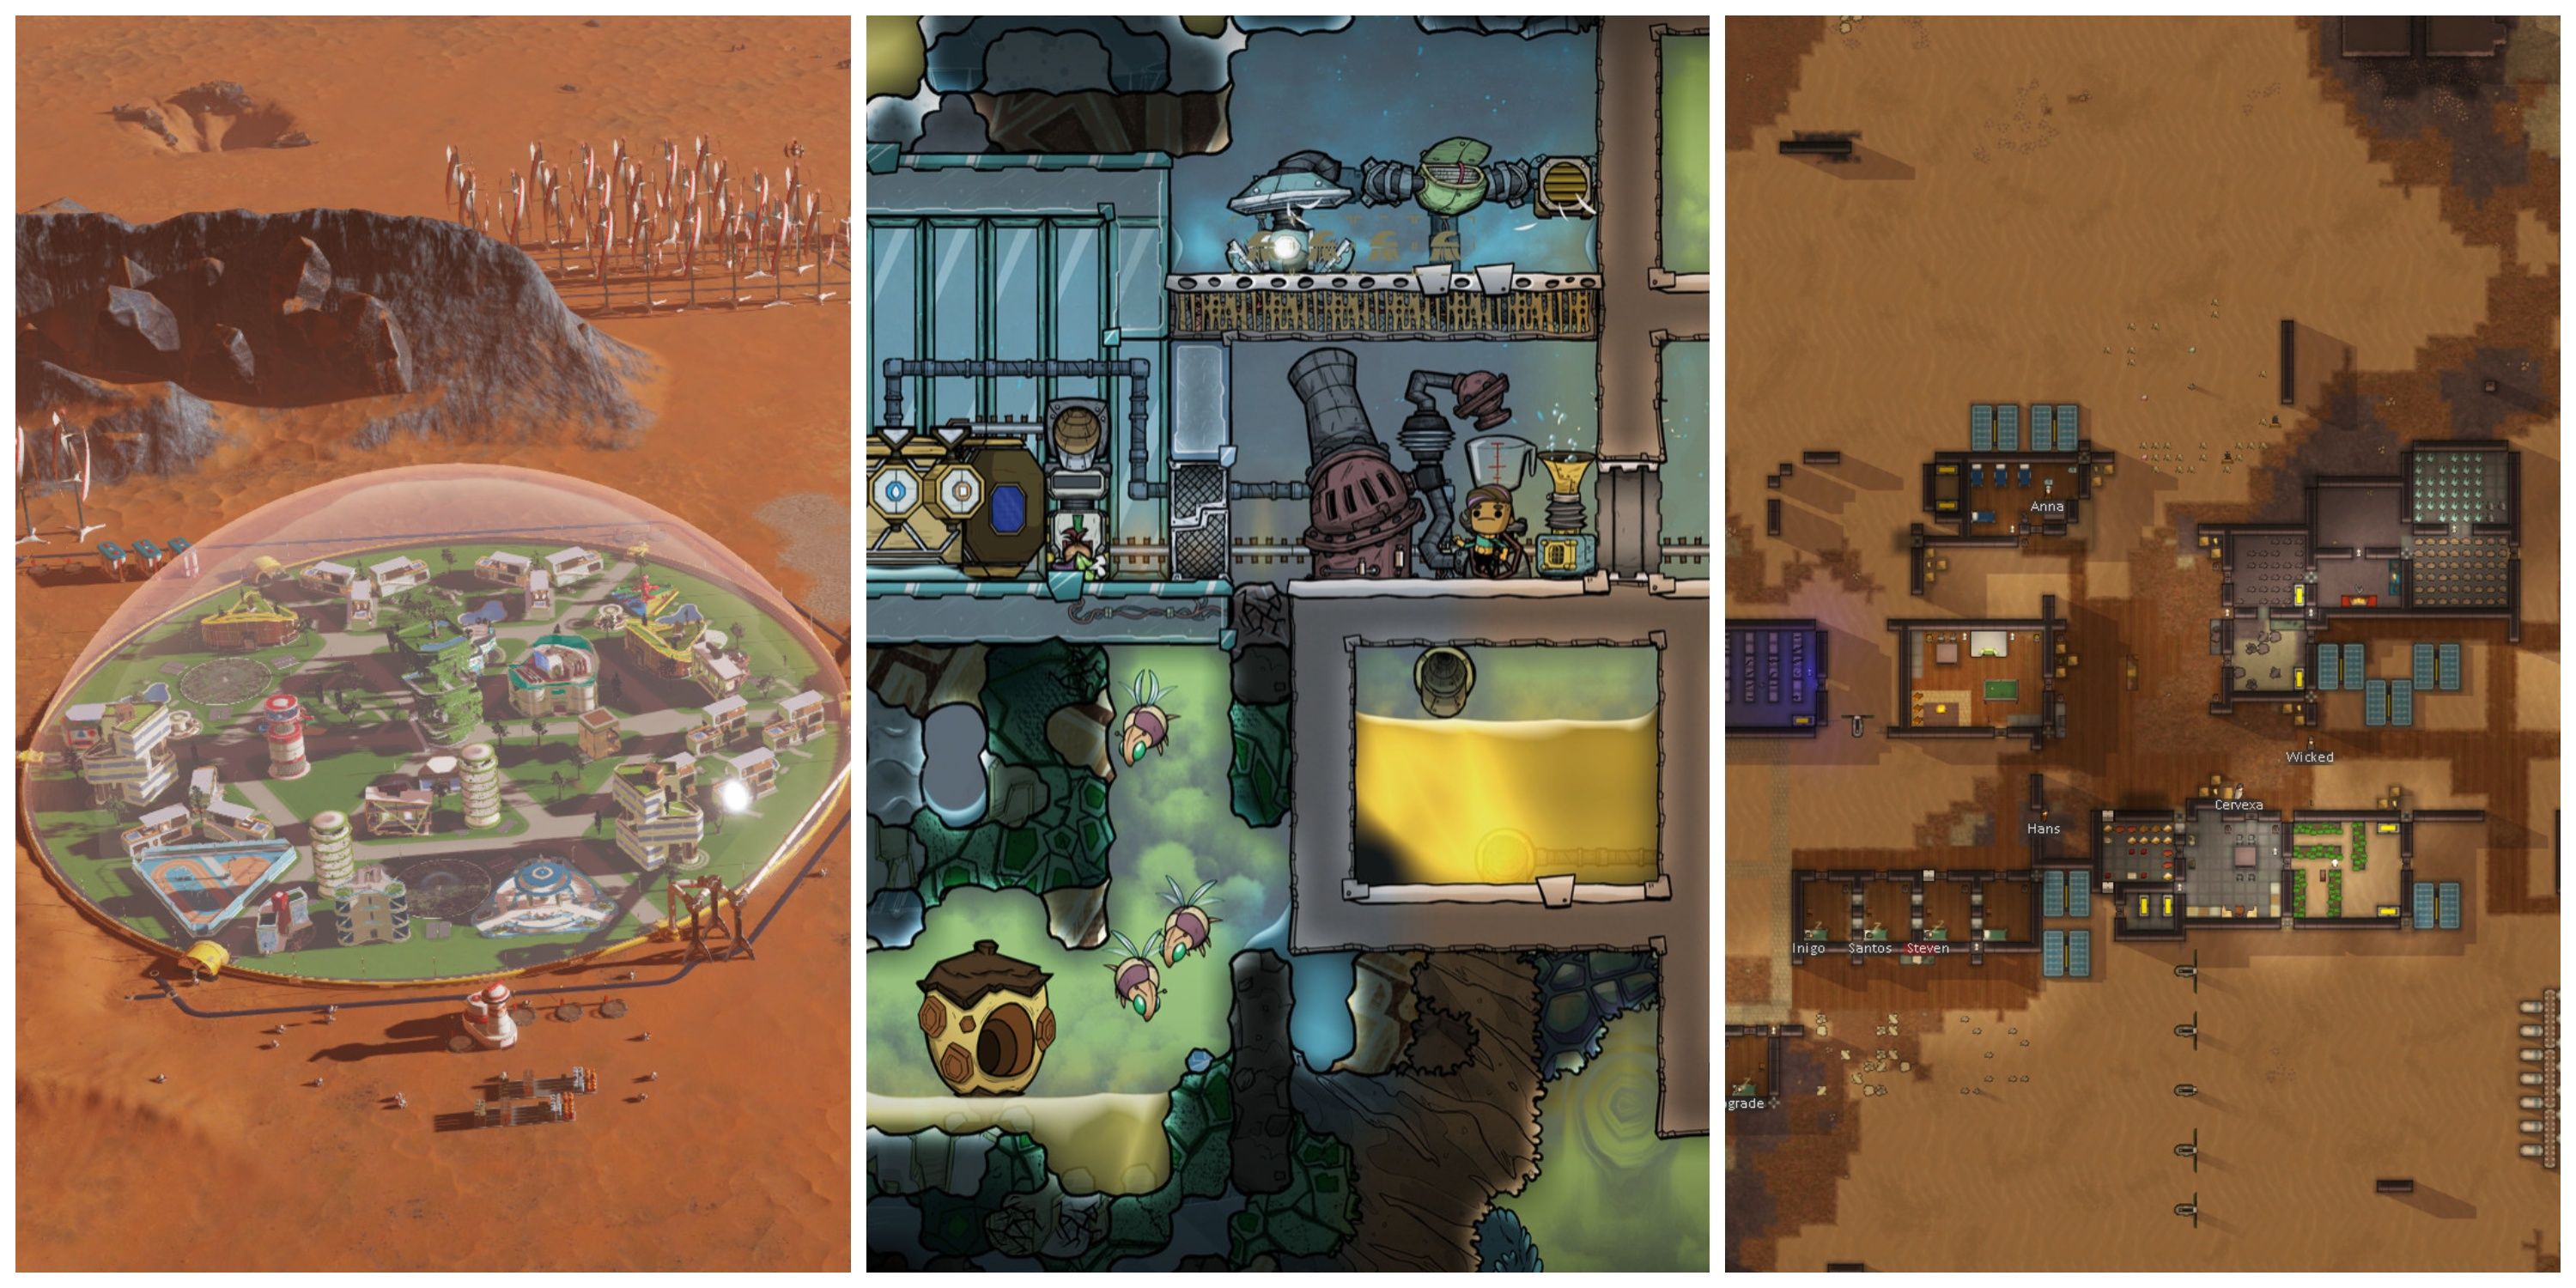 Best Sci-Fi Management Games (Featured Image) - Surviving Mars + Oxygen Not Included + RimWorld